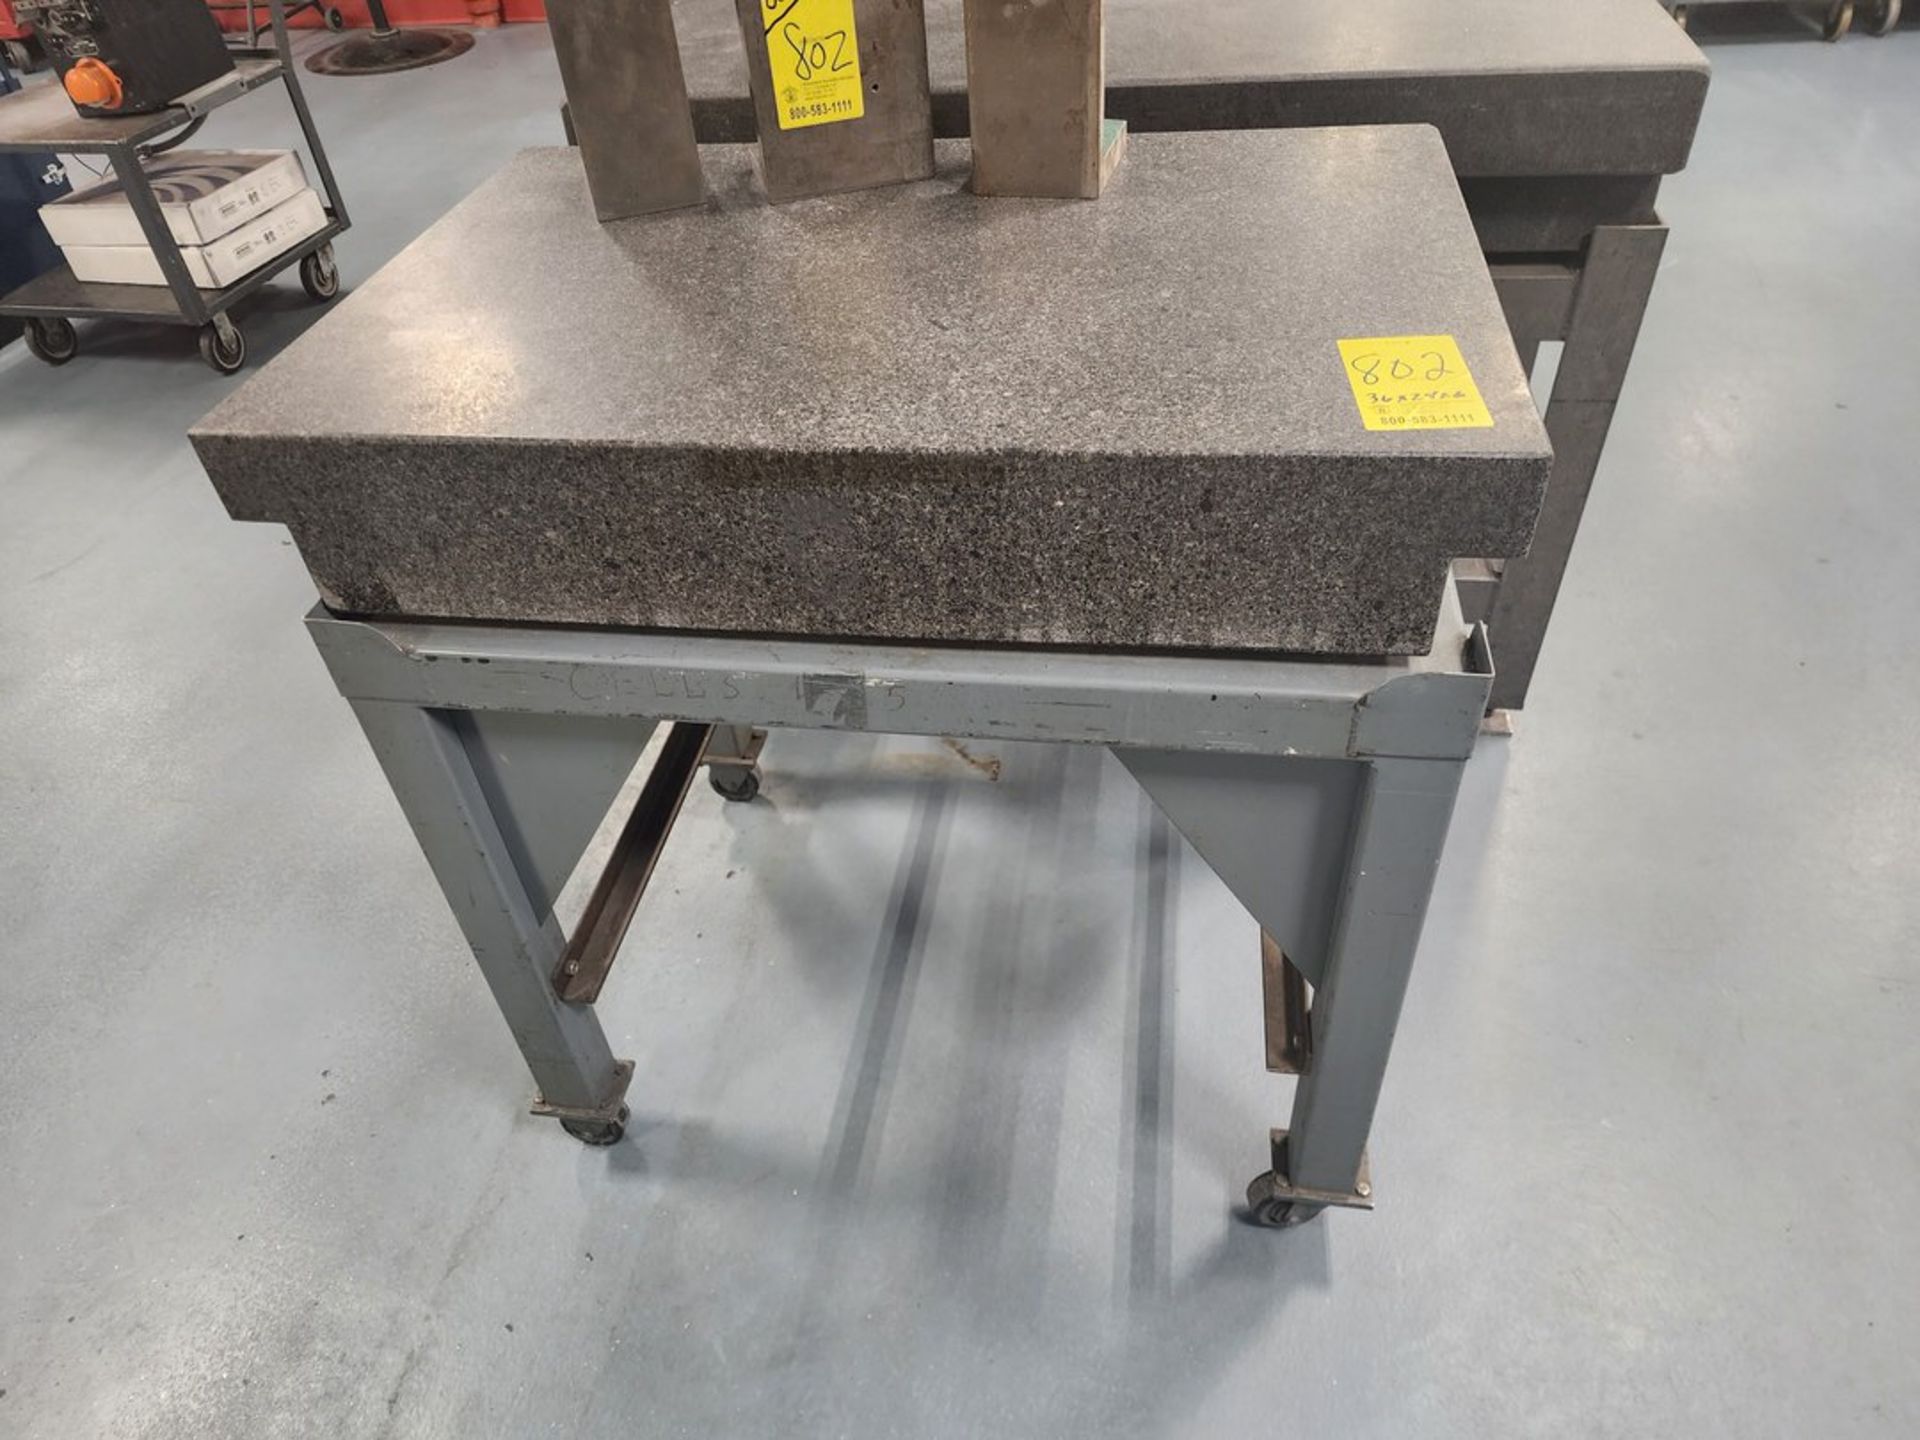 Surface Granite Plate W/ Stand 36" x 24" x 6"